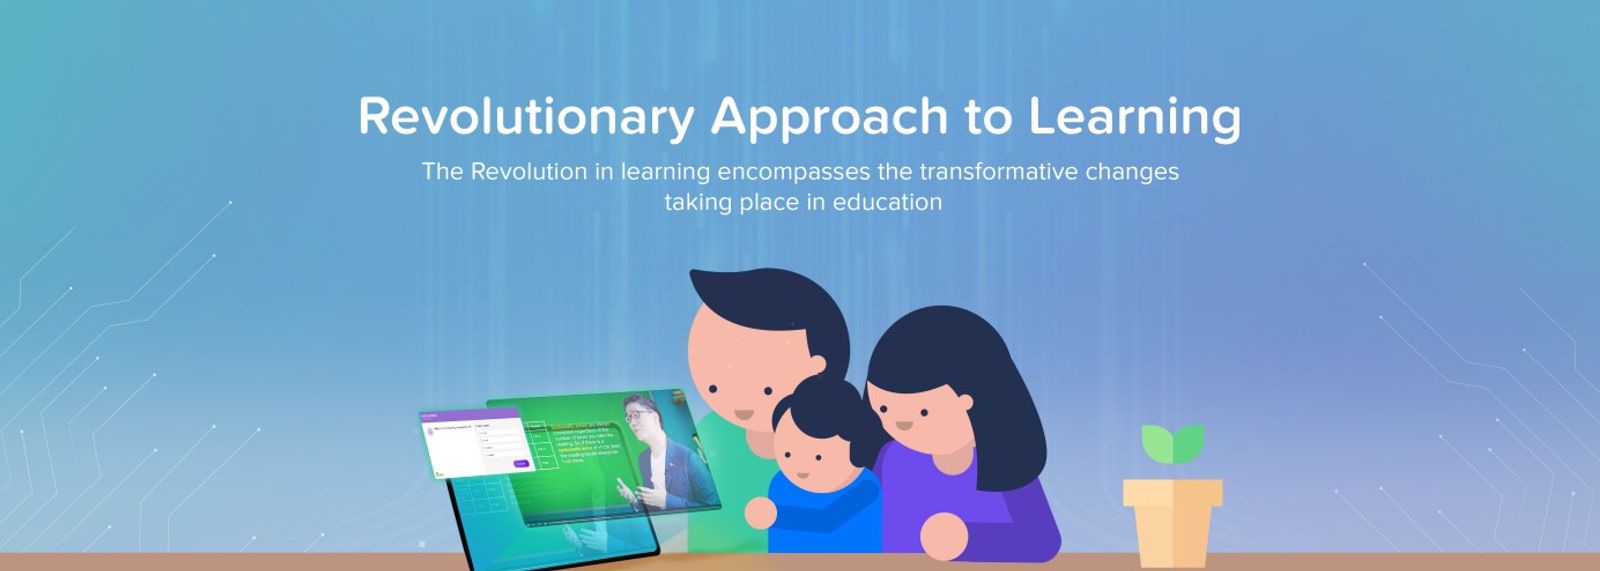 Revolutionary Approach to Learning